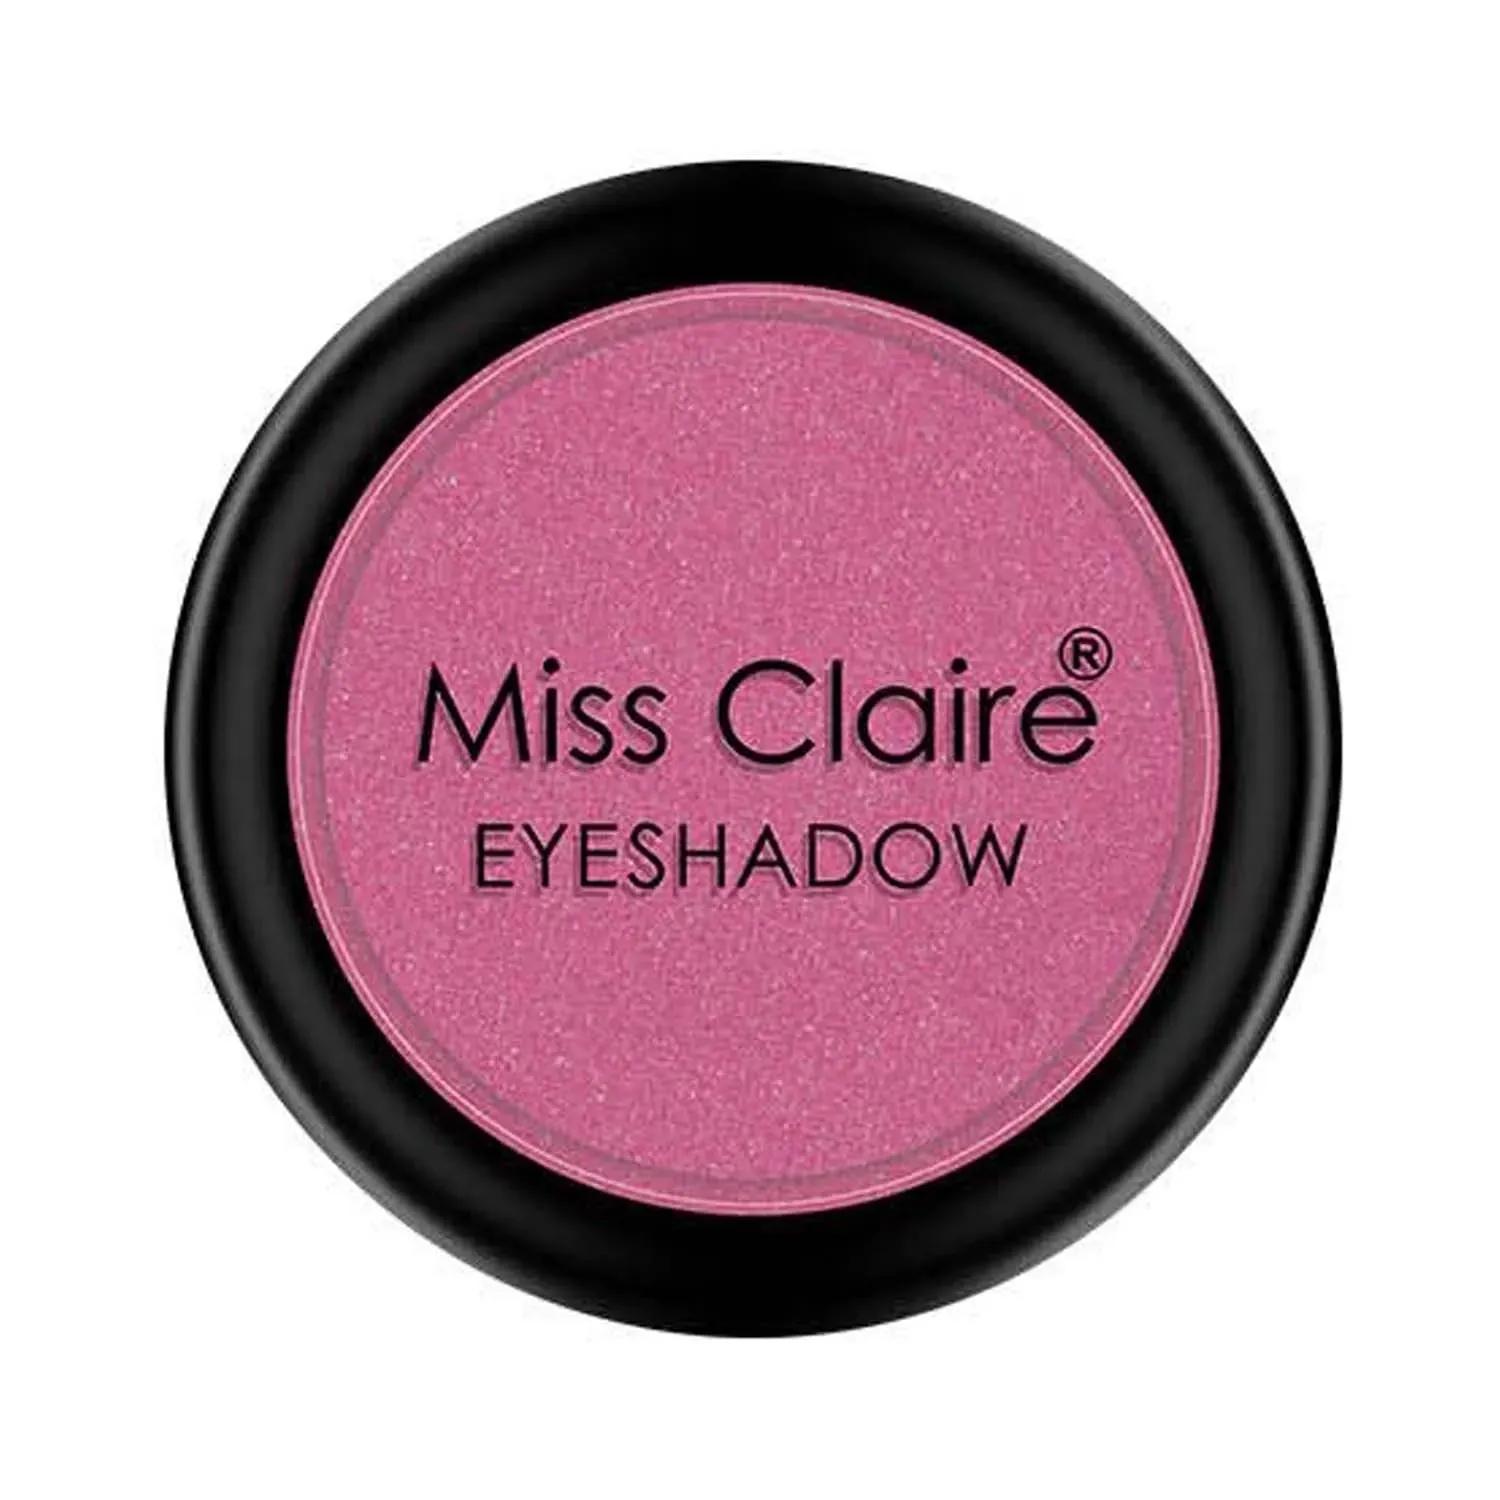 Miss Claire Single Eyeshadow - 0151 (2g)